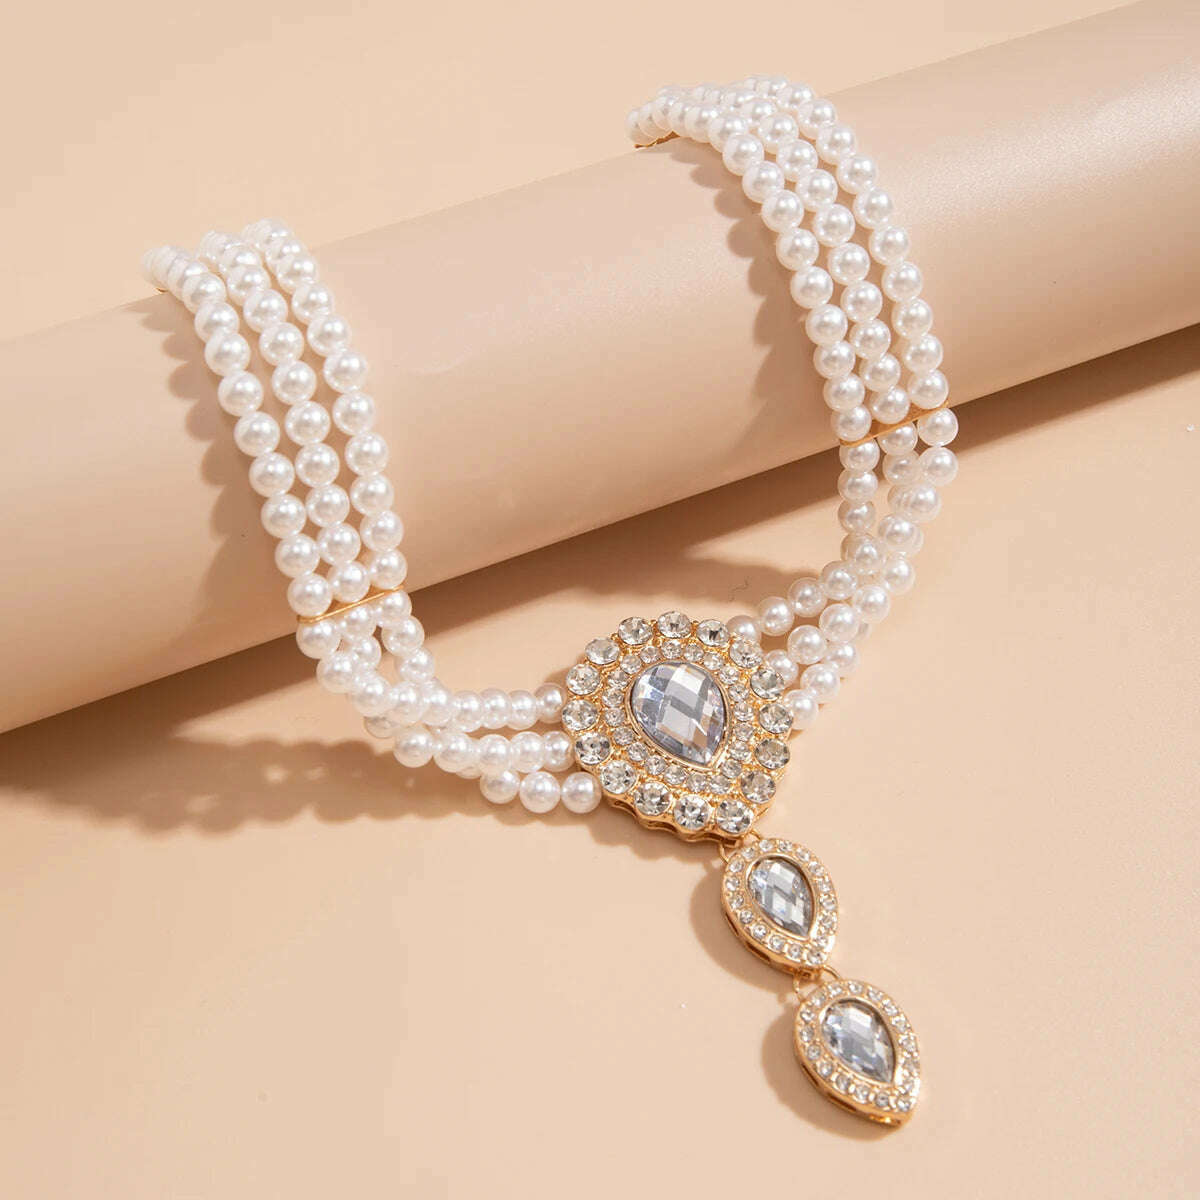 KIMLUD, Multilayer Elegant Imitation Pearl Chain Necklace Bracelet for Women Creative Water Drop Rhinestone Jewelry Set Wed Accessories, KIMLUD Womens Clothes